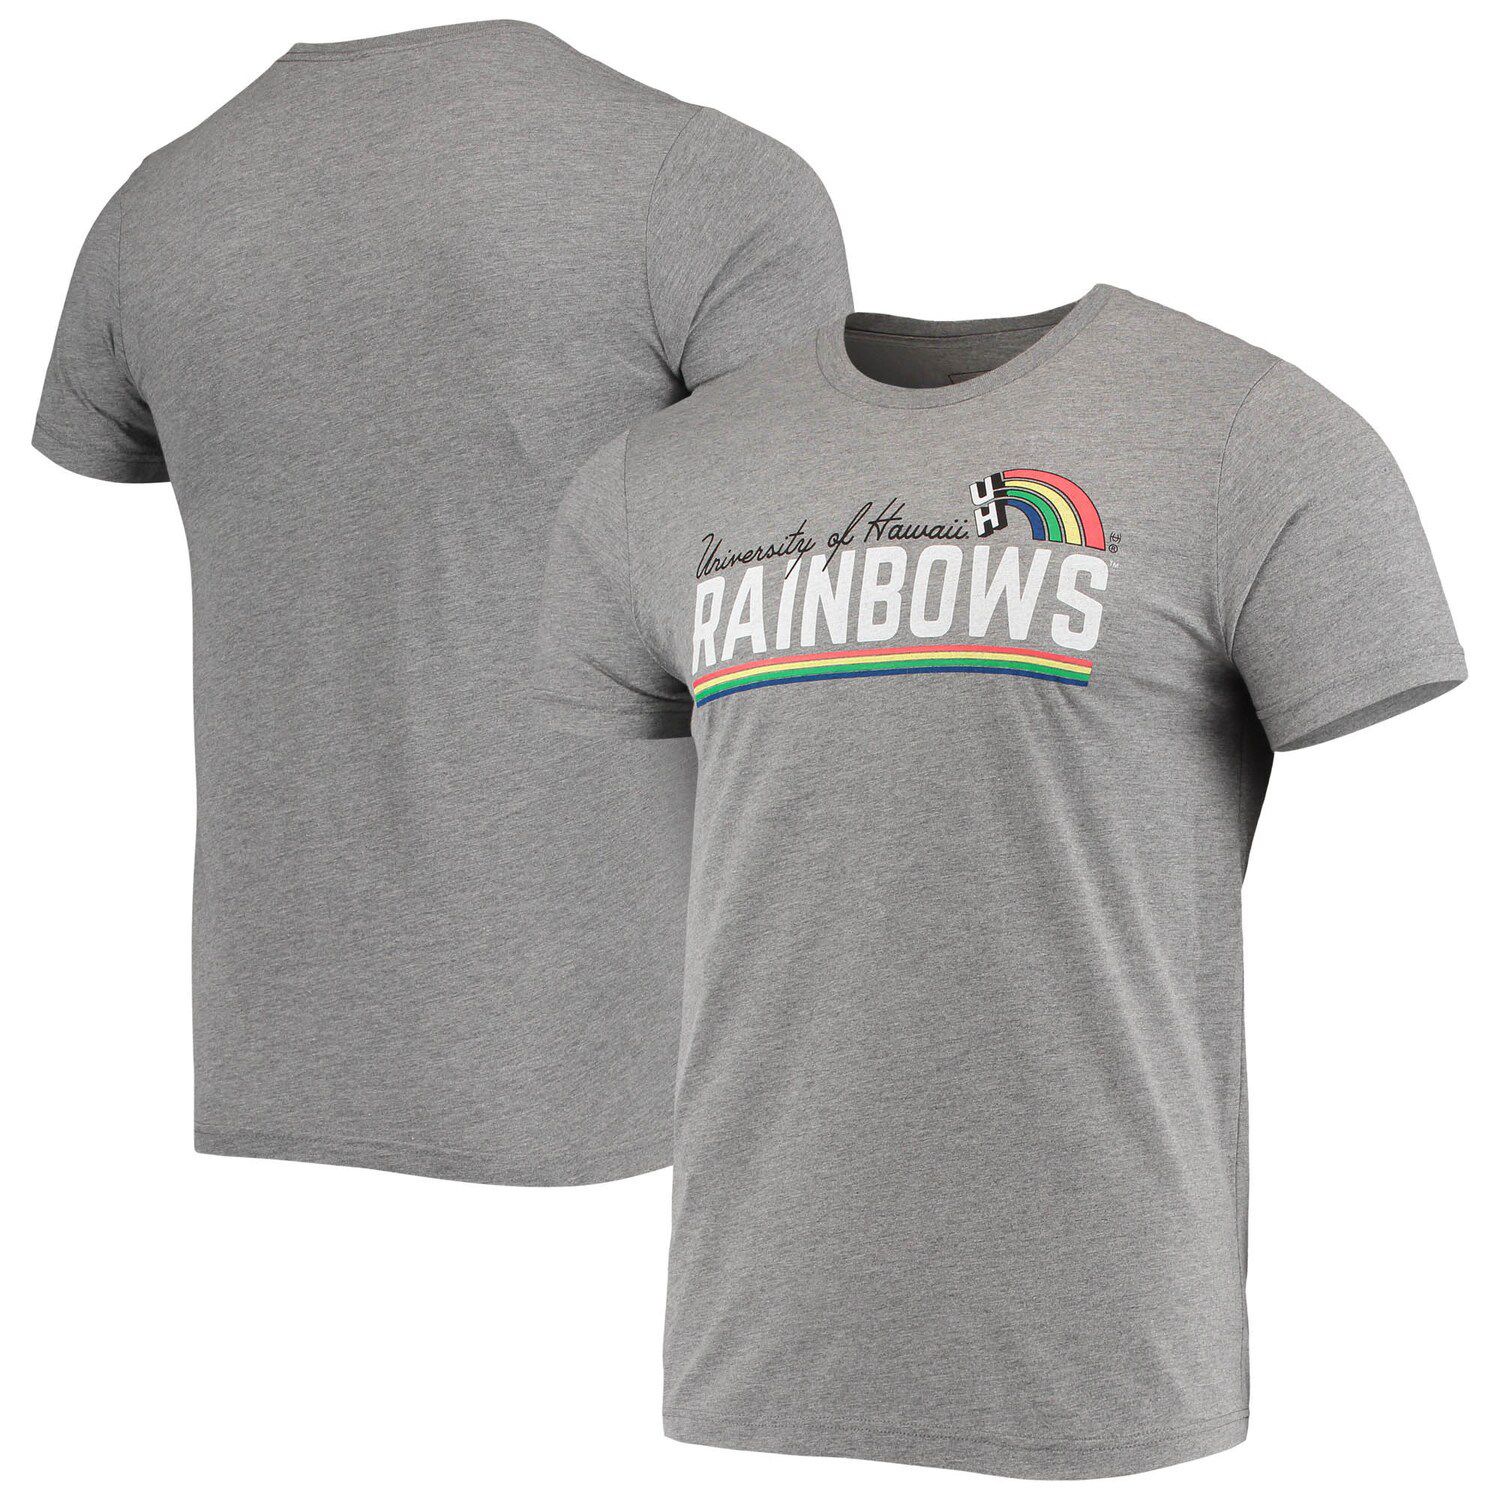 Image for Unbranded Men's Homefield Heathered Gray Hawaii Warriors Vintage Rainbows Tri-Blend T-Shirt at Kohl's.